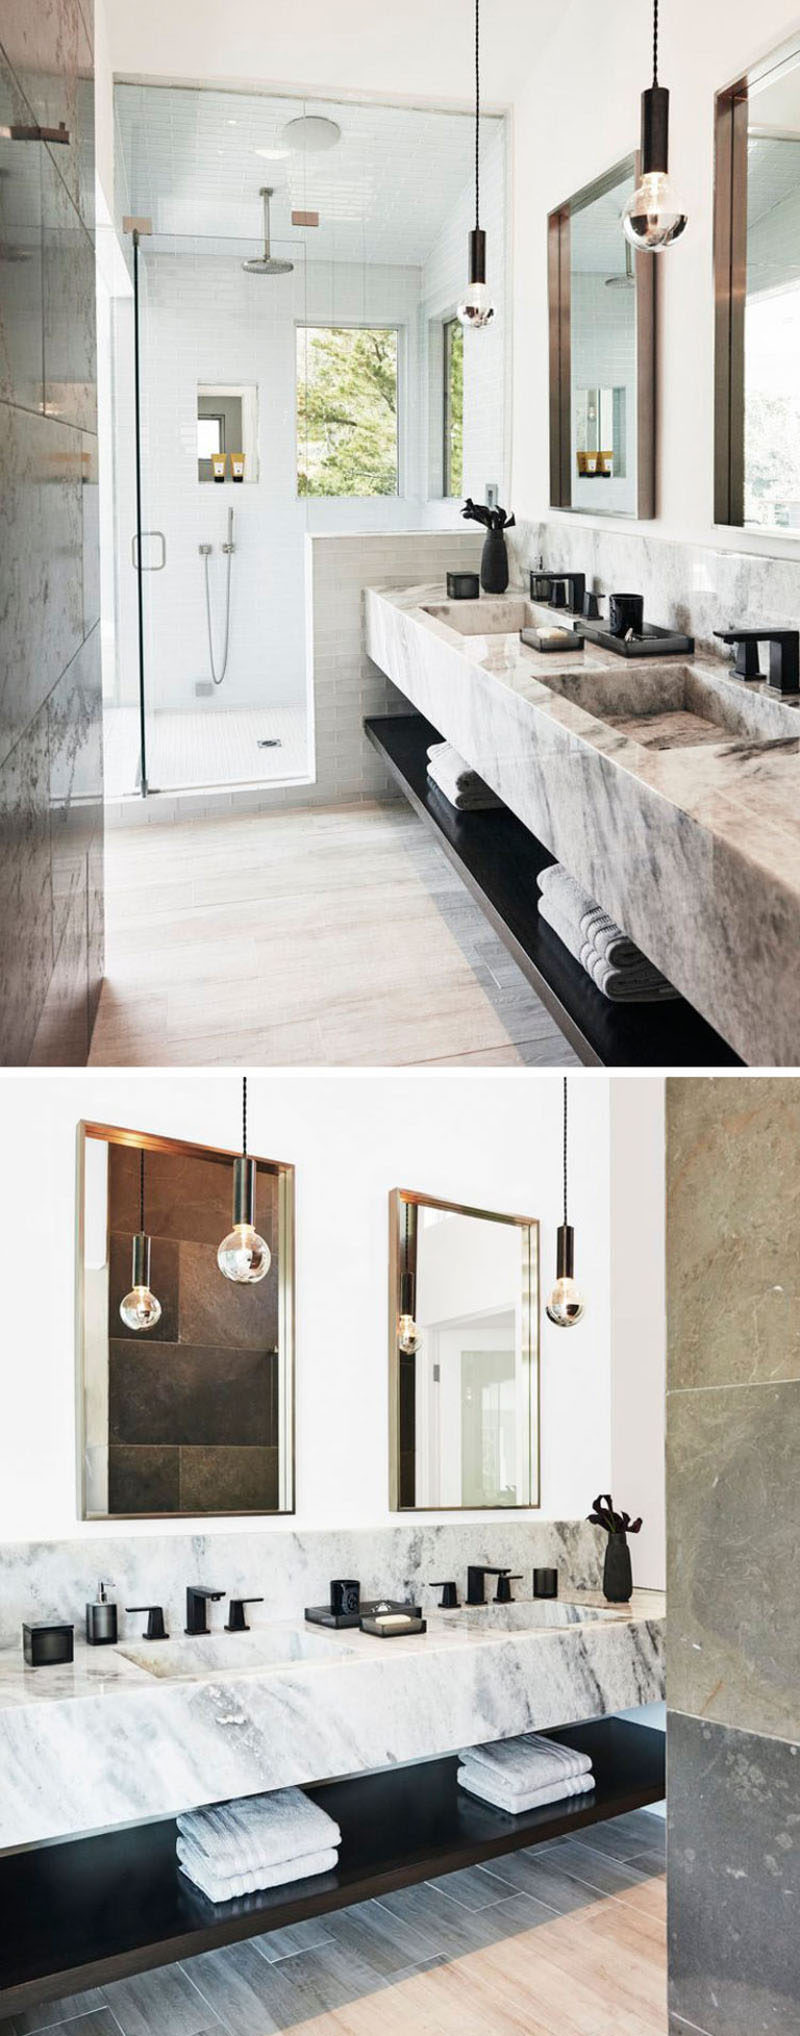 Bathroom Design Ideas - Open Shelf Below The Countertop // The dark shelf under this stone counter contrast the light materials in the bathroom and tie in the black hardware and accessories.